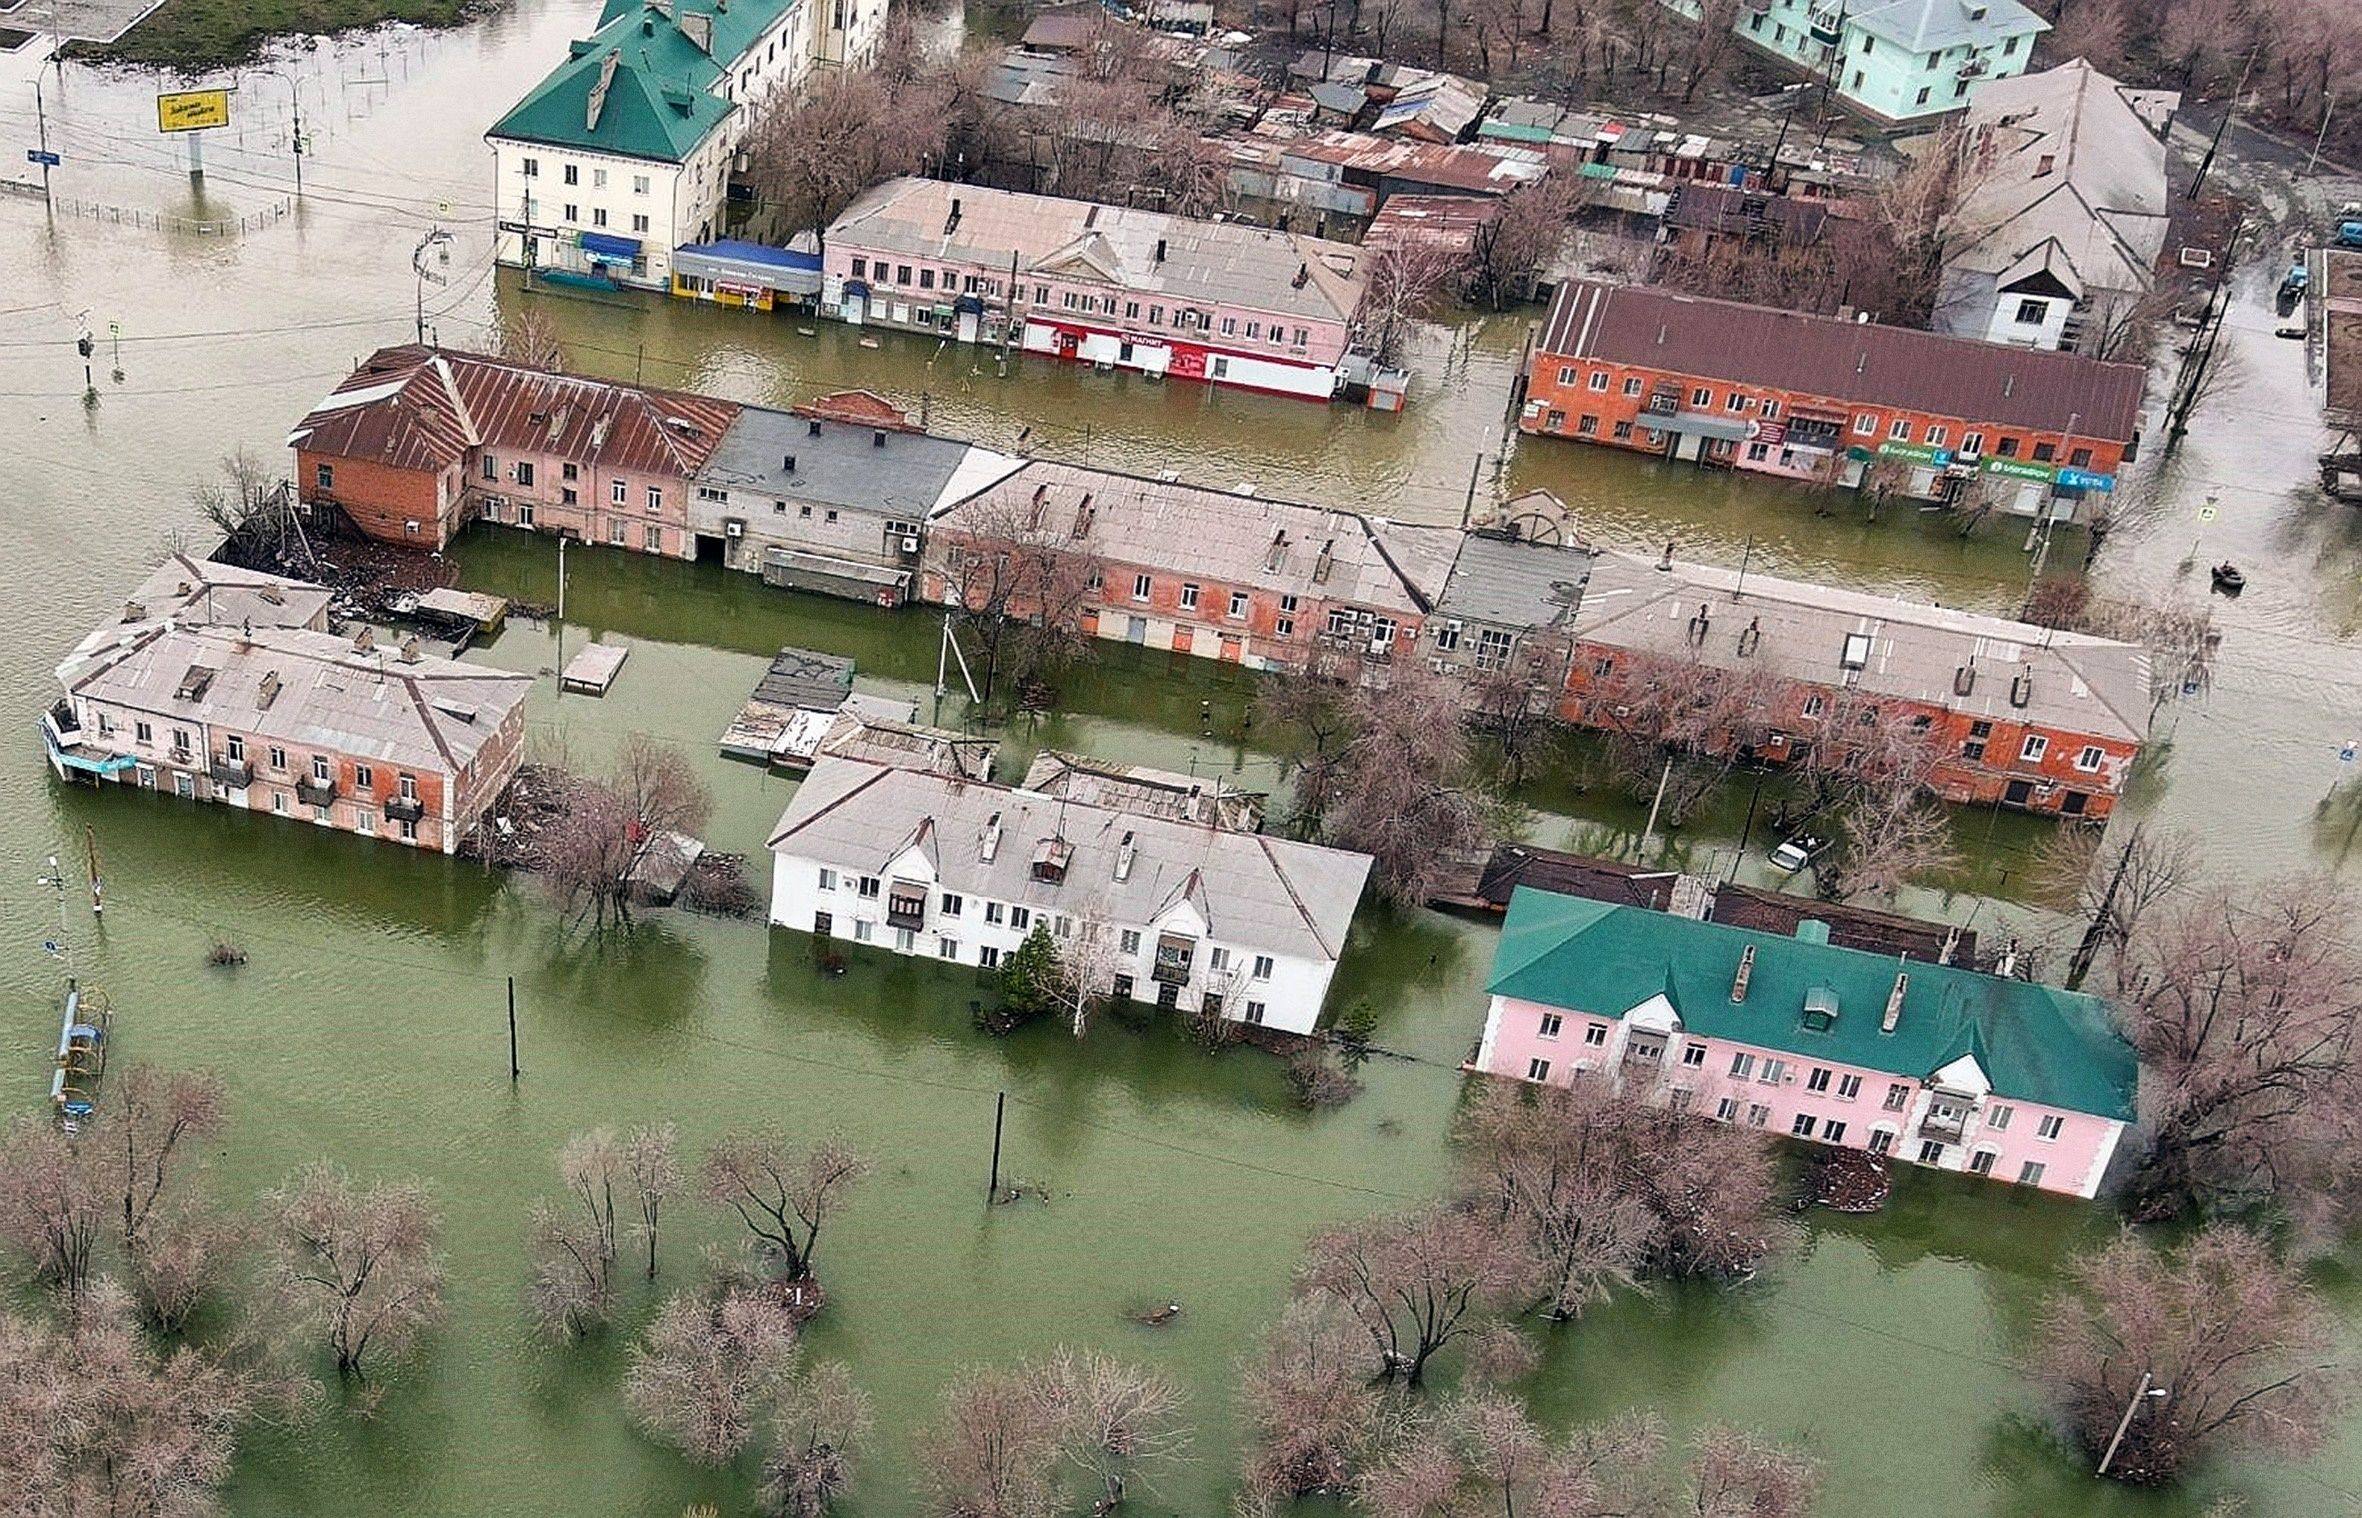 A flooded part of the city of Orsk, Russia’s Orenburg region. Photo: Kommersant via AFP